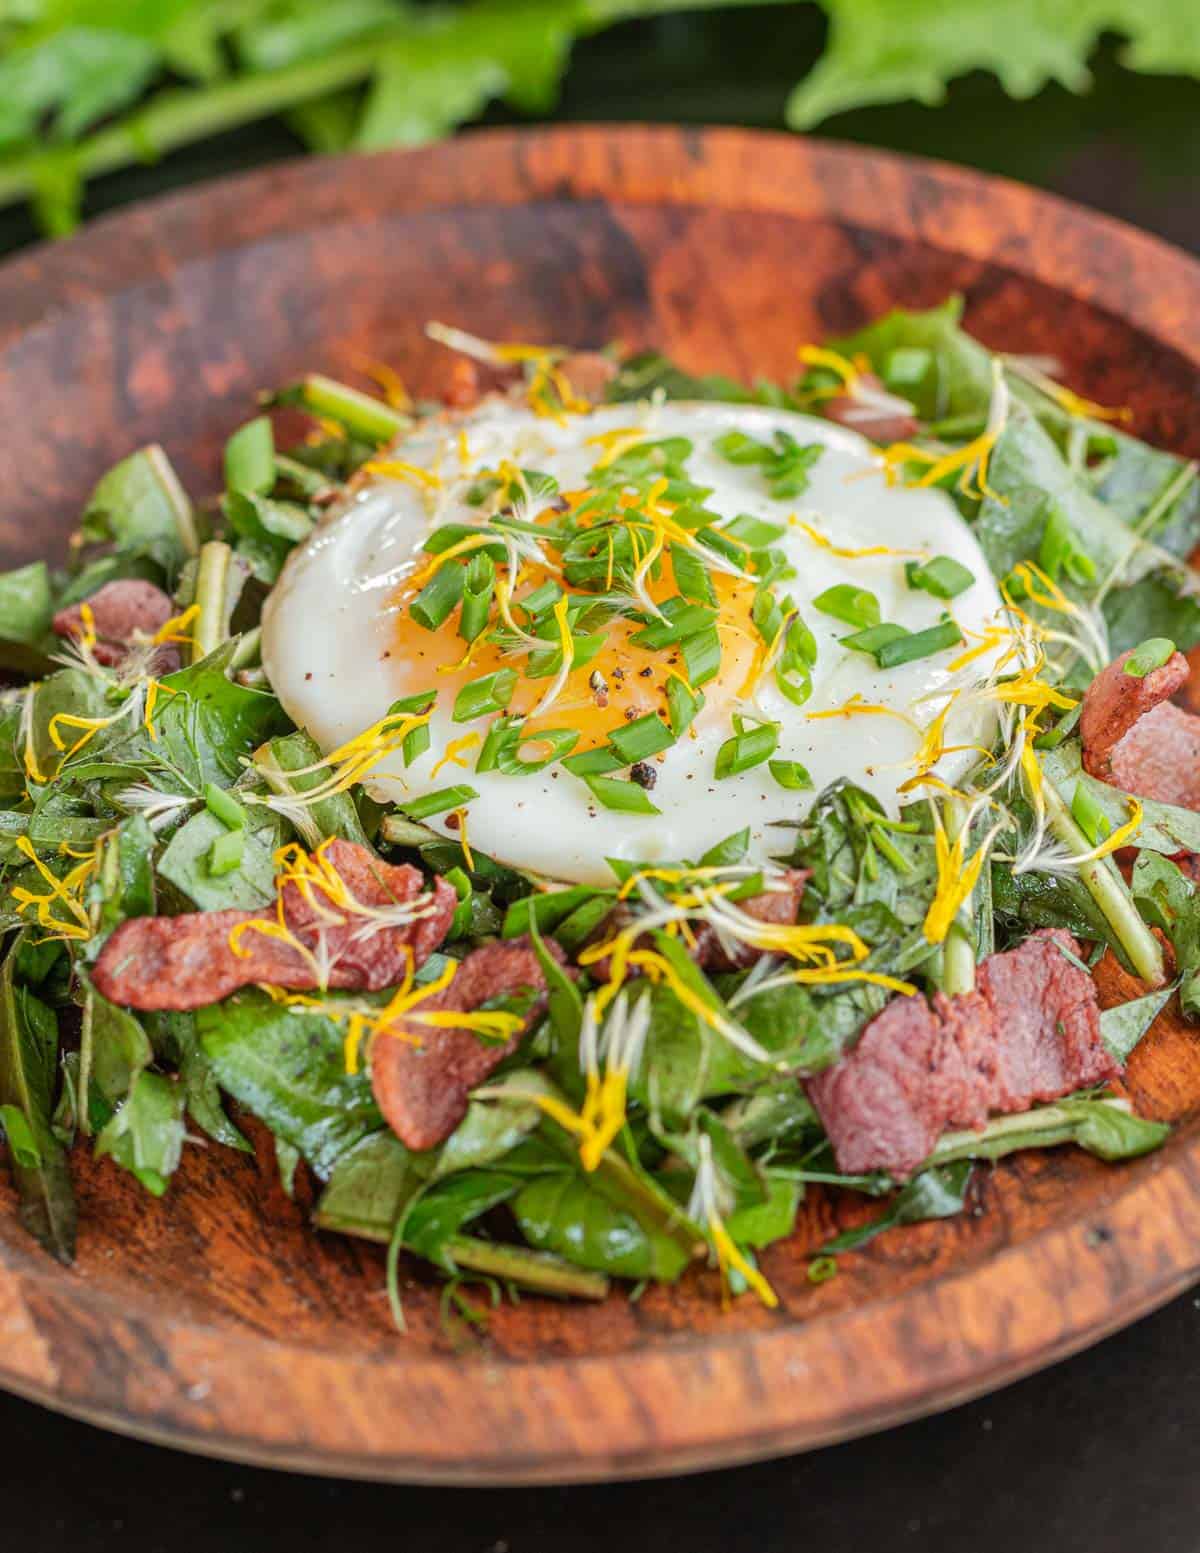 Dandelion salad with bacon dressing served with a sunny side up egg garnished with dandelion flowers, herbs and chives. 